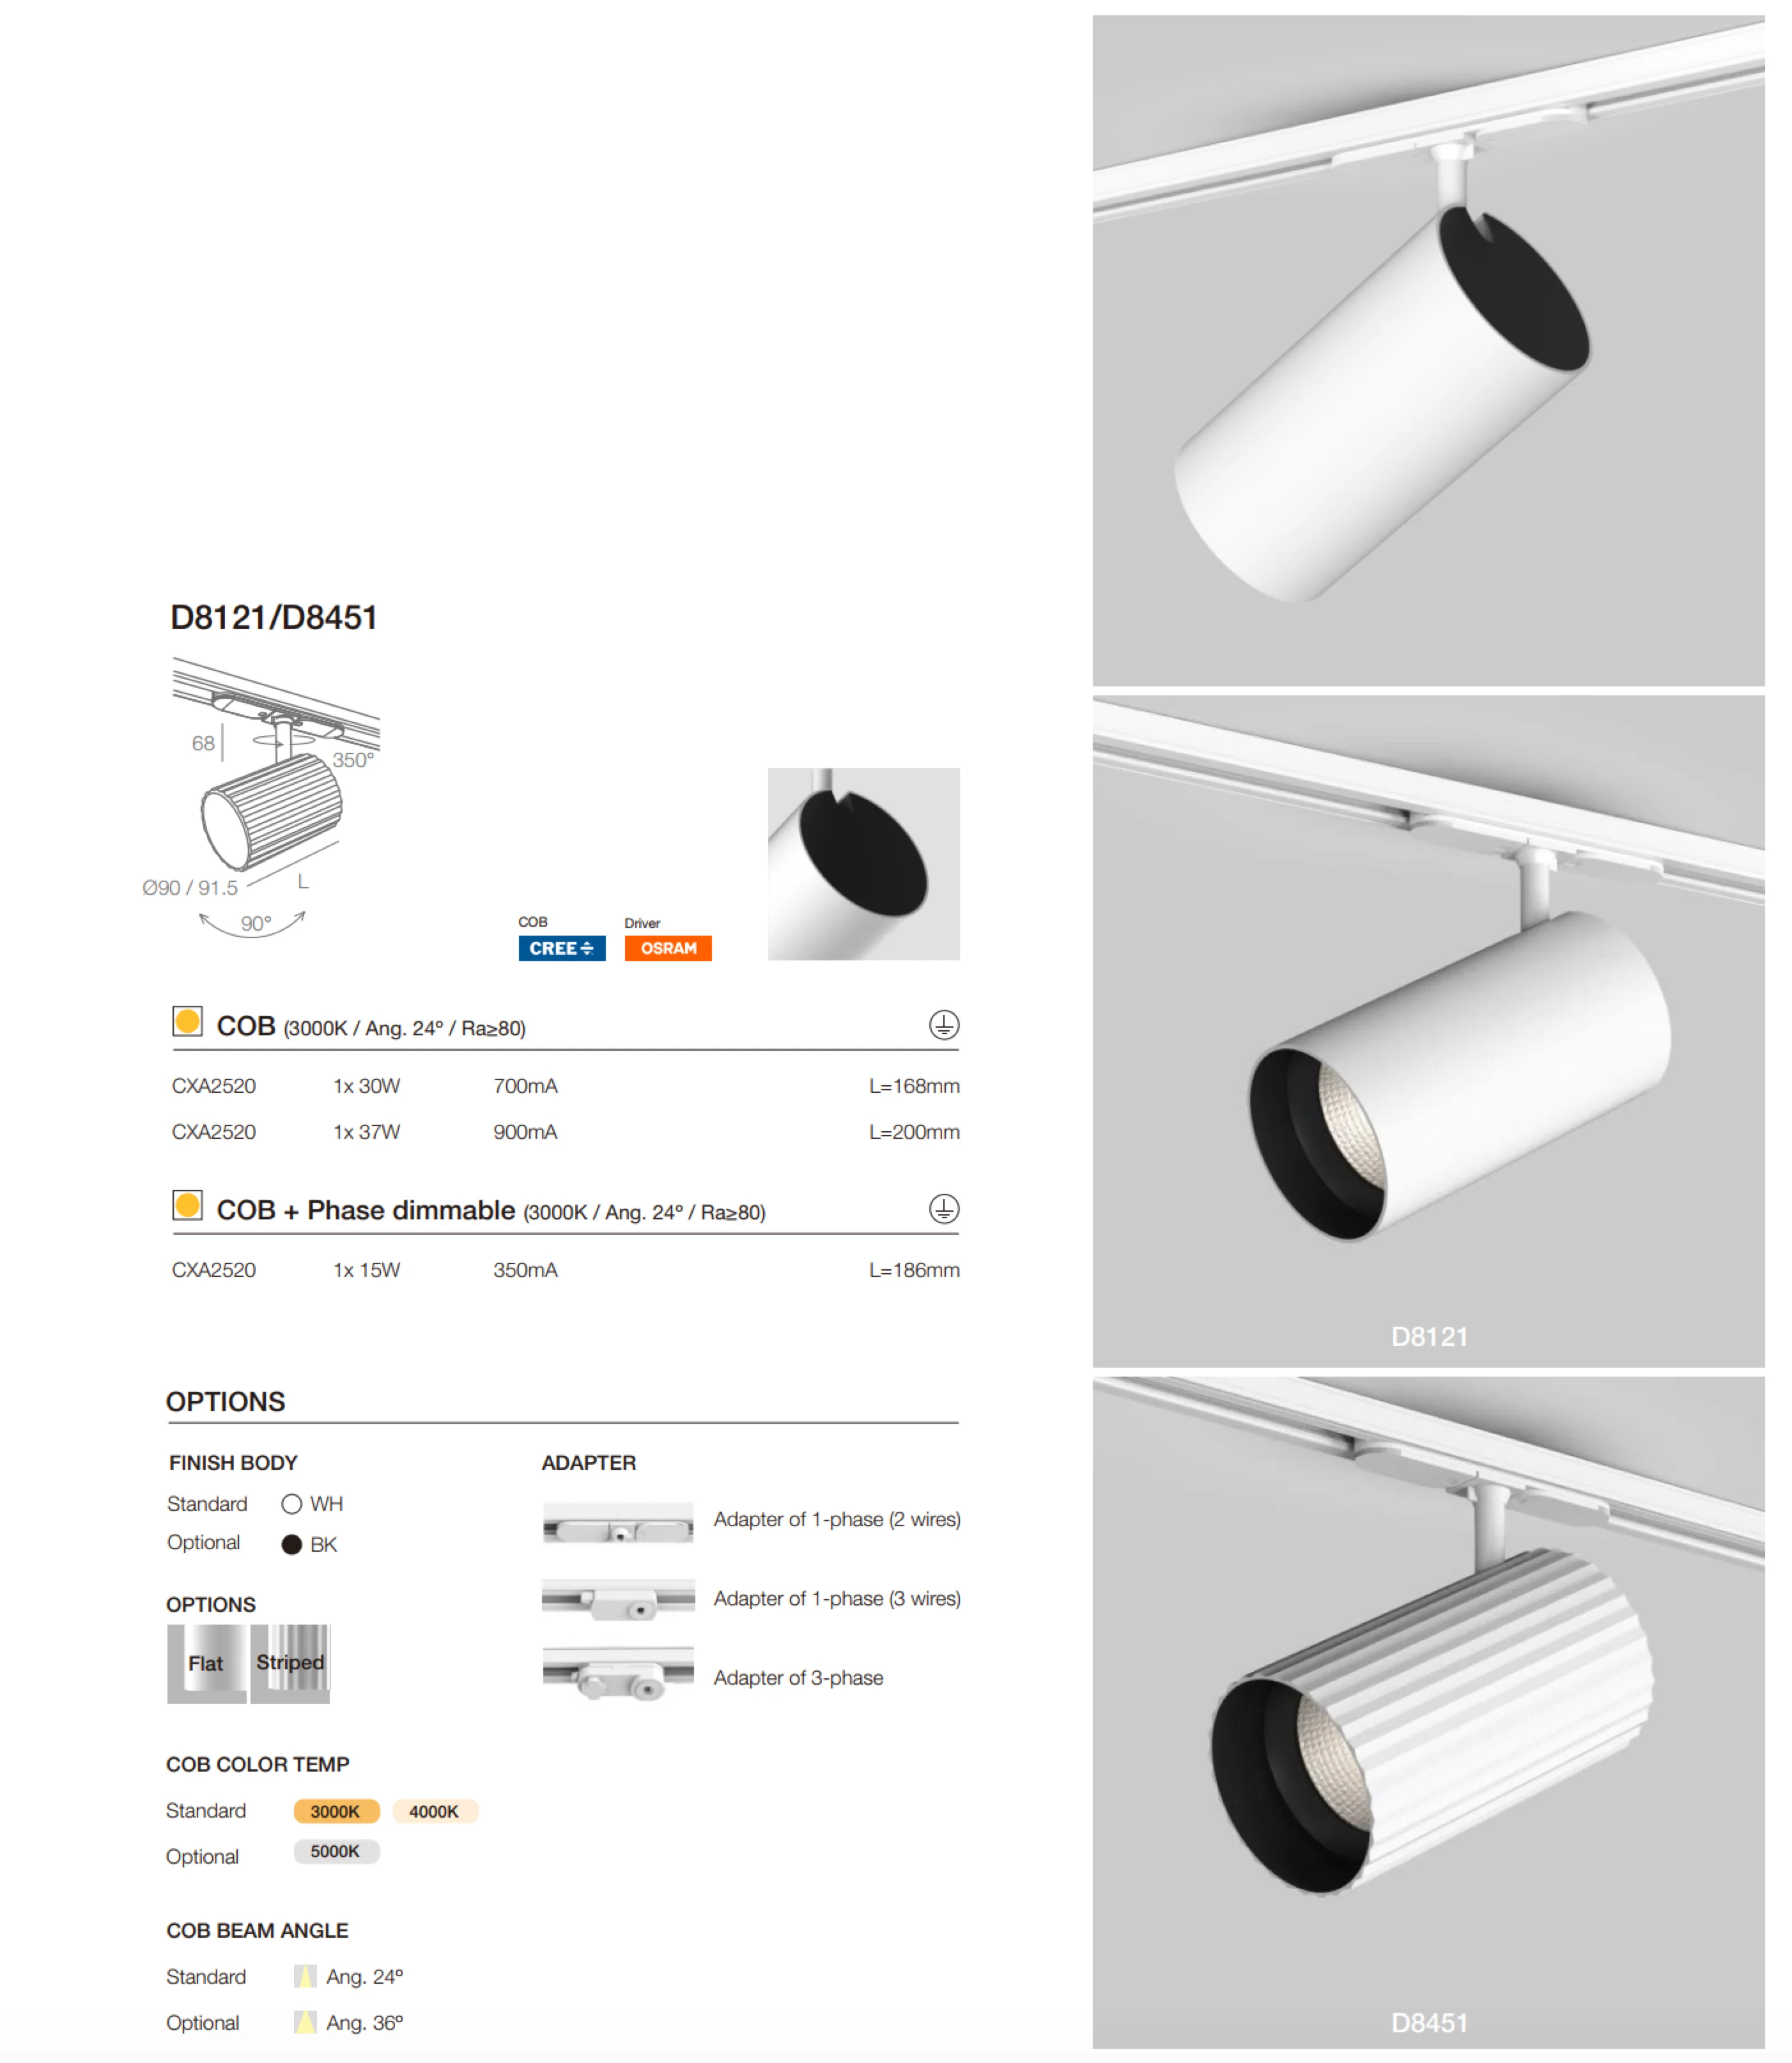 ECOJAS D8161 gu10 track light new design perfect for shop display room and gallery track light square head